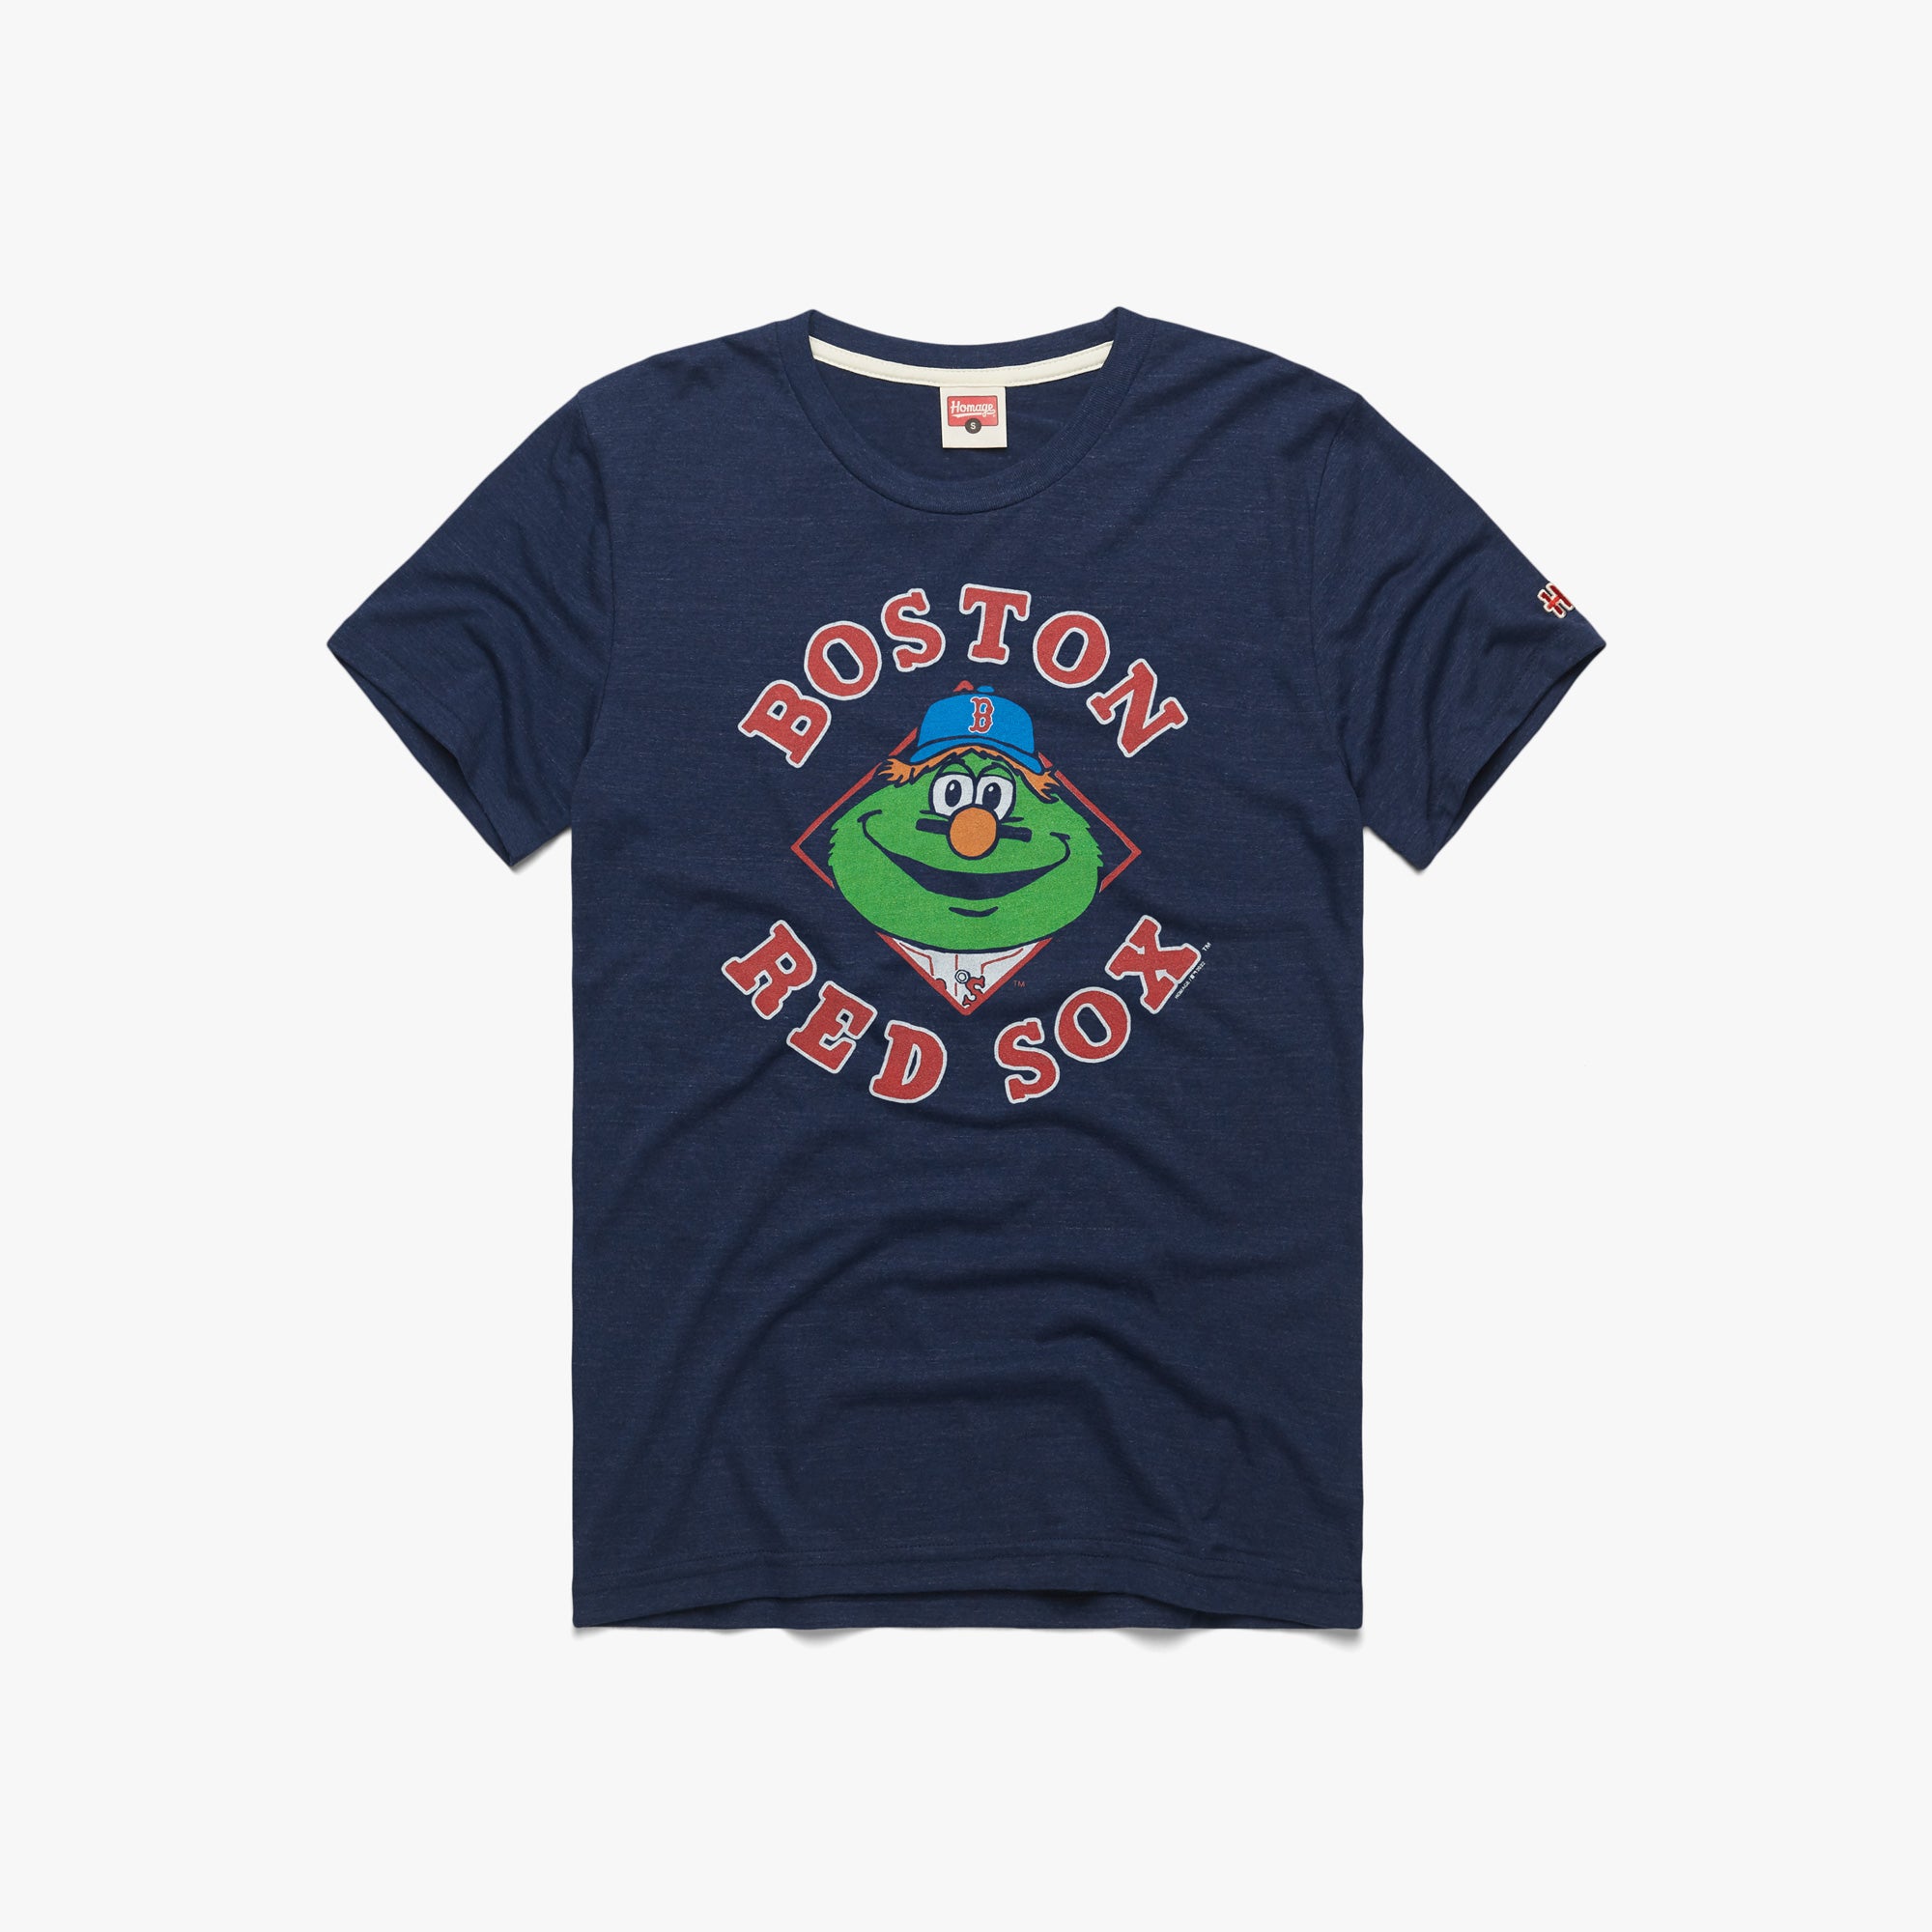 Boston Red Sox Wally The Green Monster T-Shirt from Homage. | Navy | Vintage Apparel from Homage.